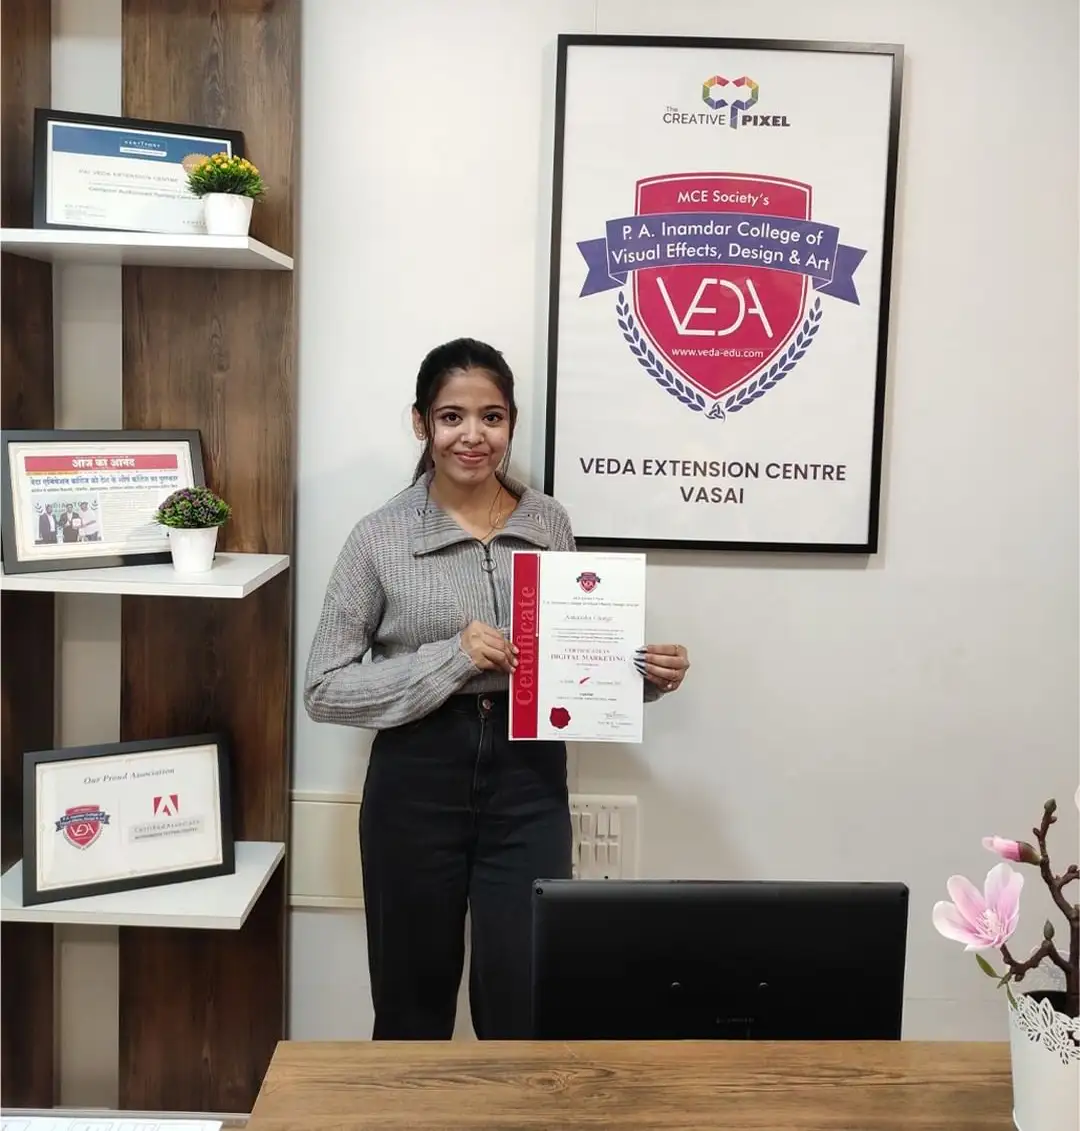 Digital Marketing Course Certificate received by the student at VEDAVASAI Mumbai 2